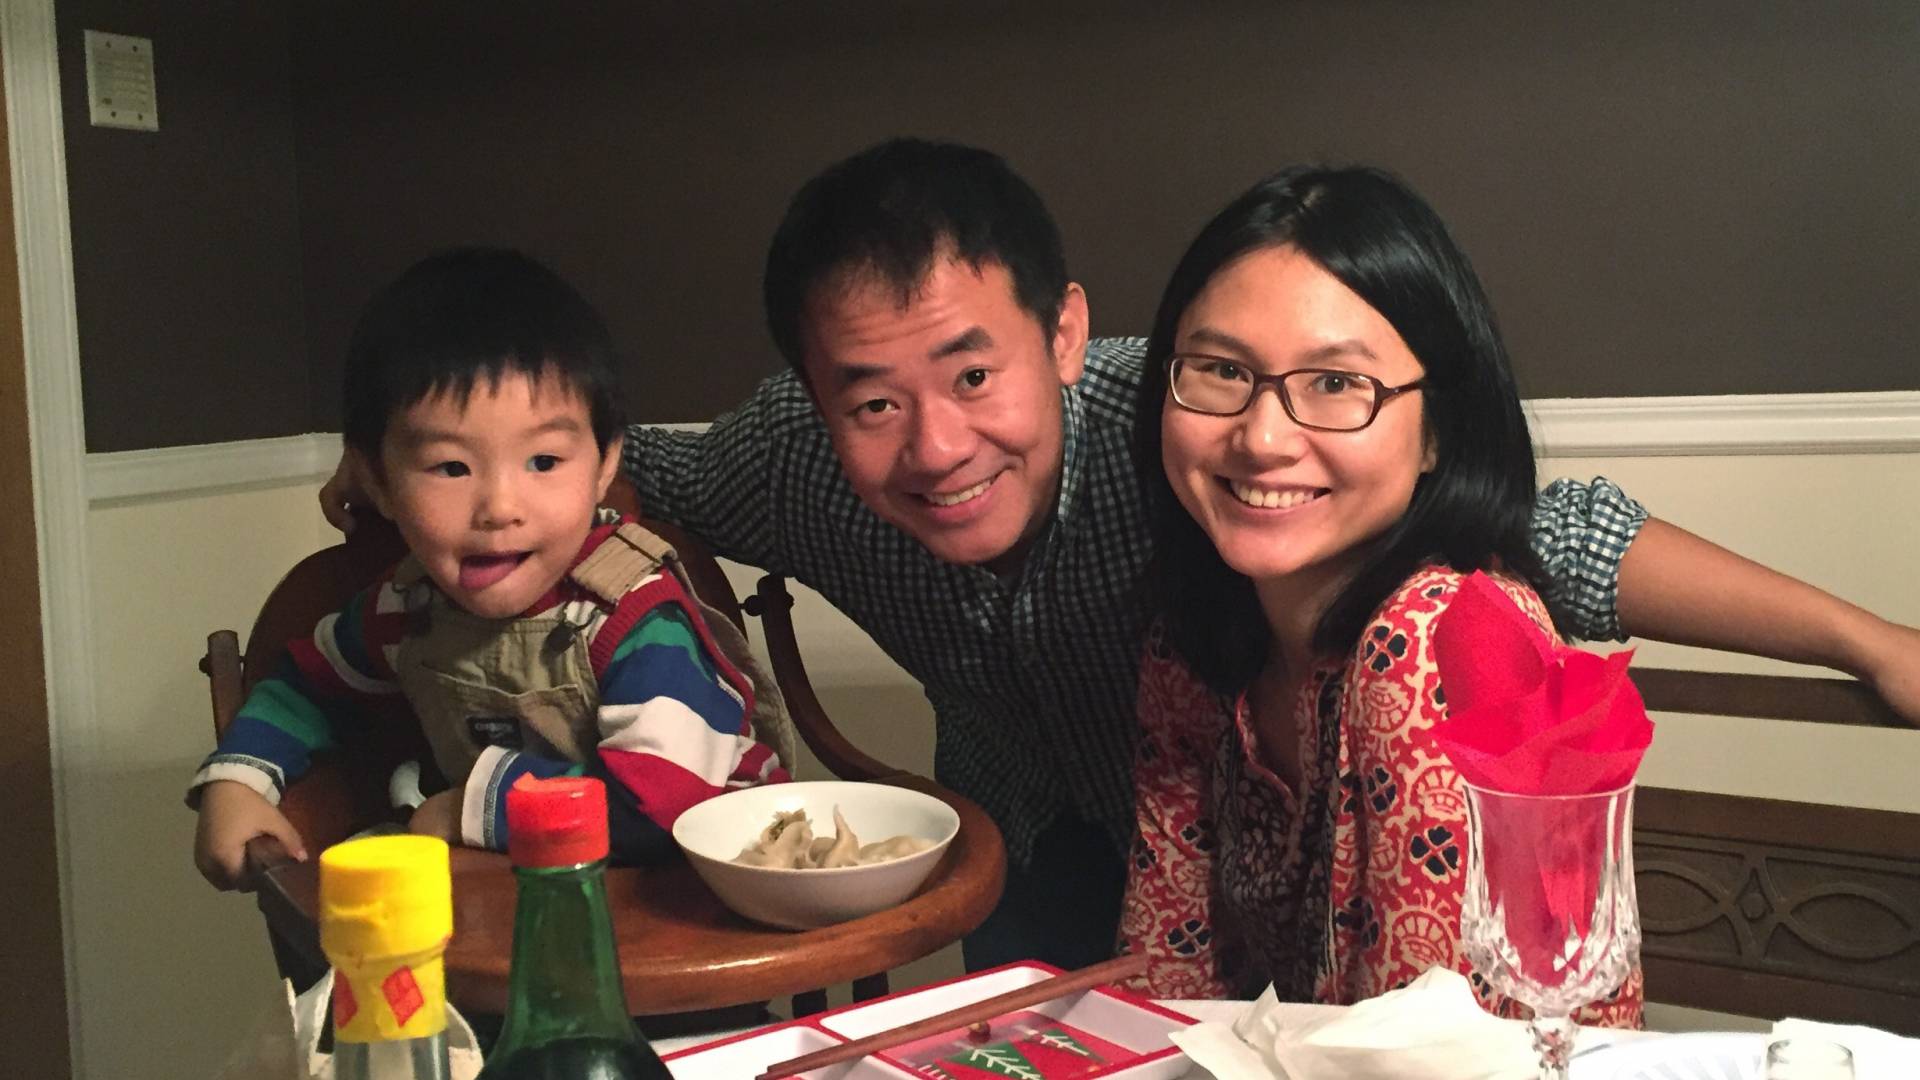 Xiyue Wang, Hua Qu and their son seated at a table